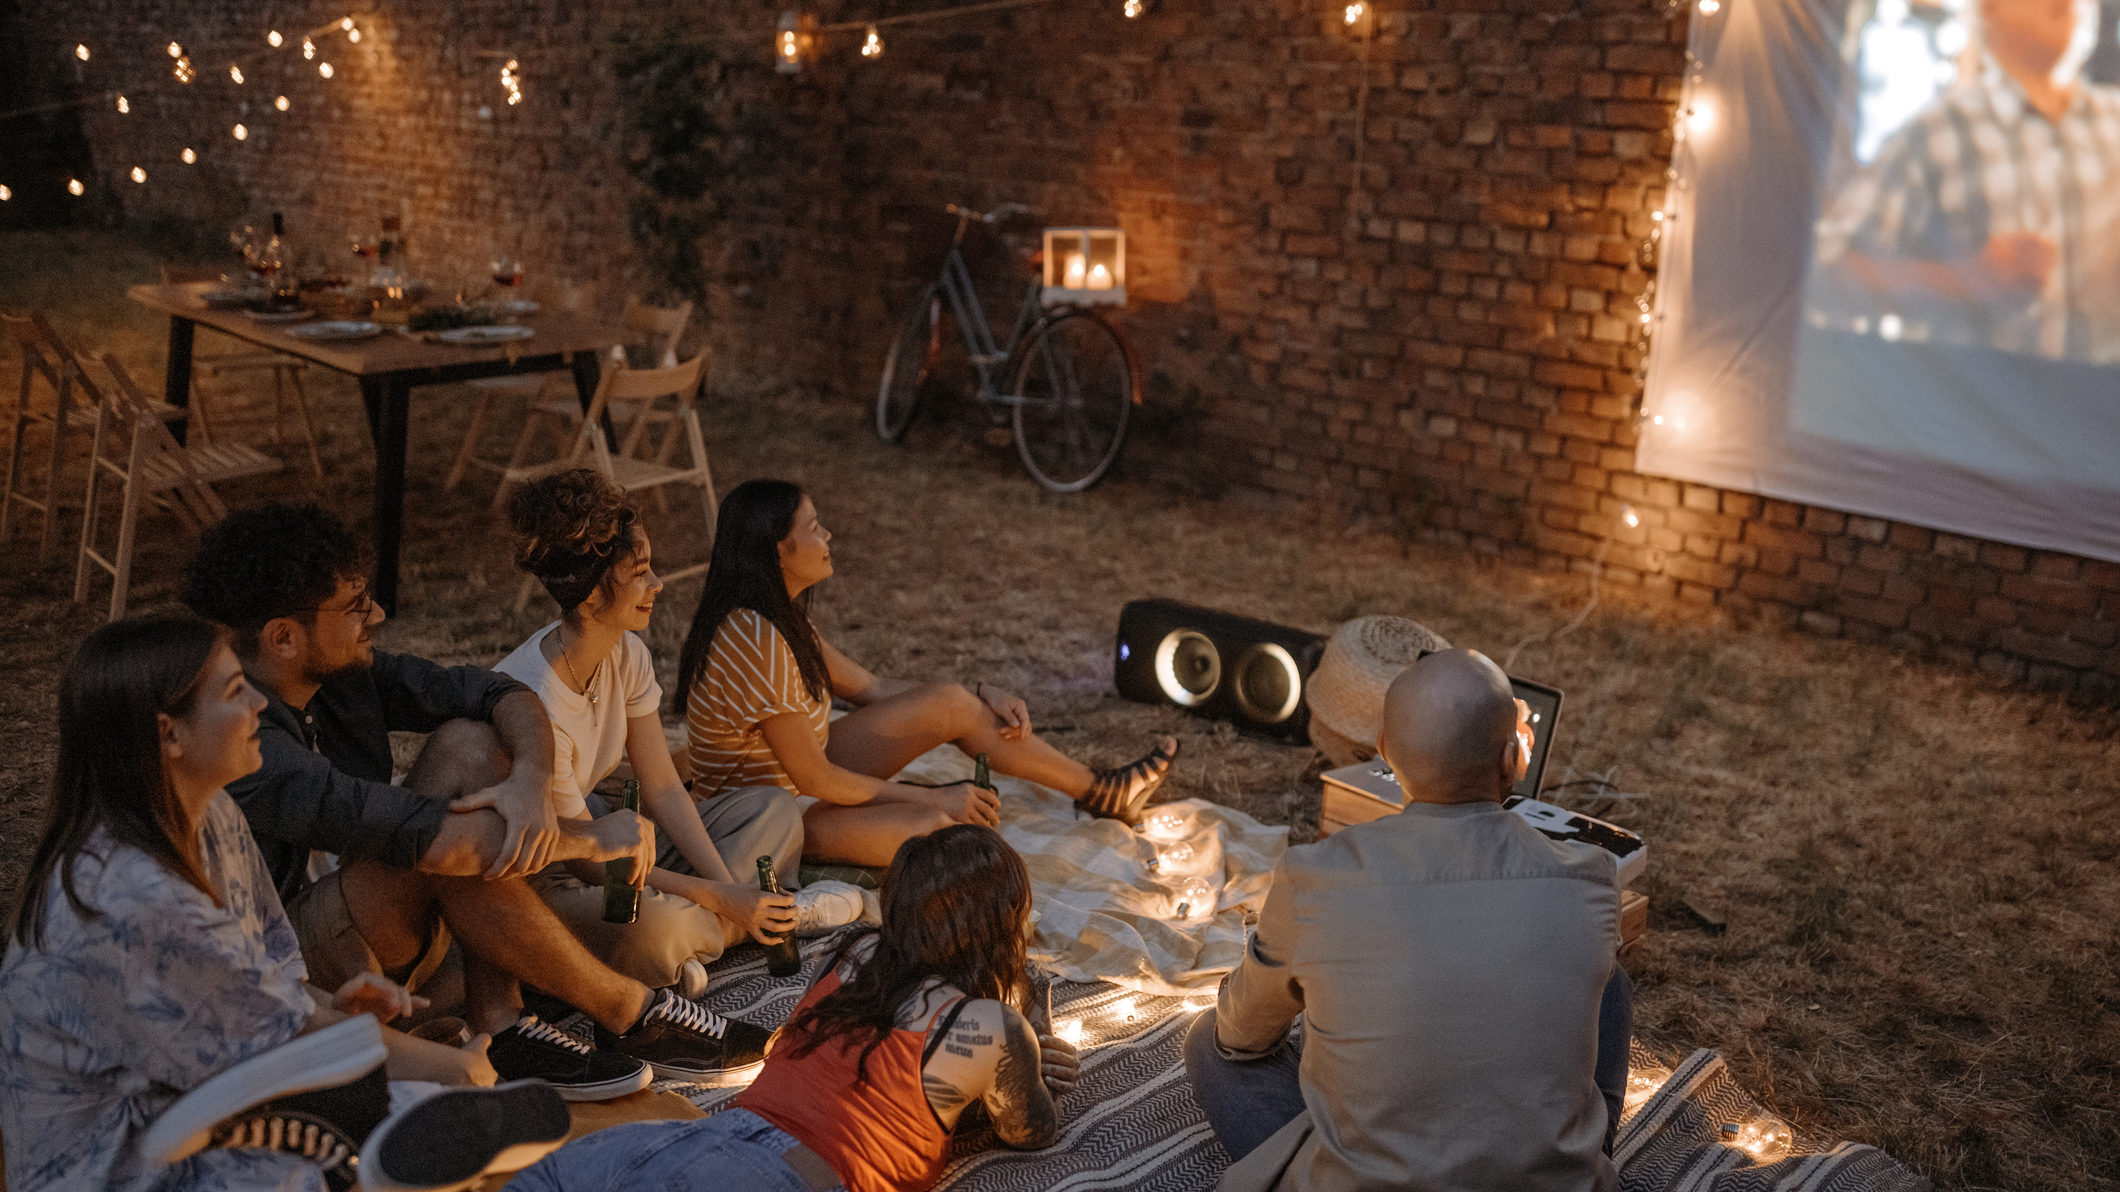 Grab this mini projector for cheap